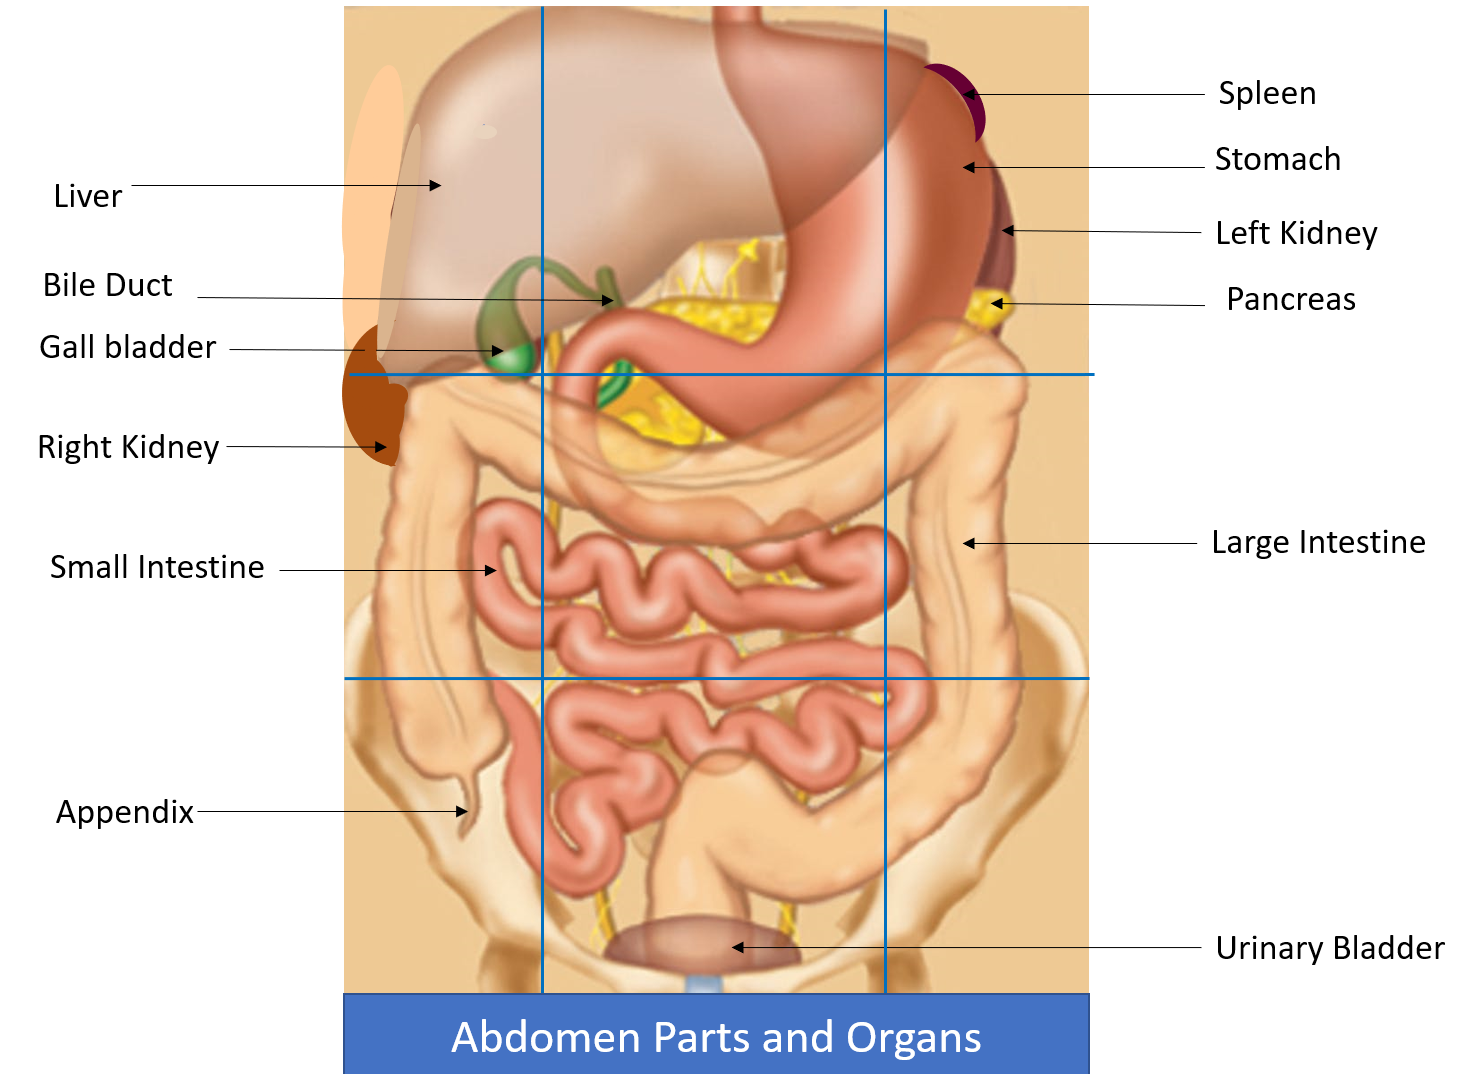 Abdominal Pain Causes and its appropriate action